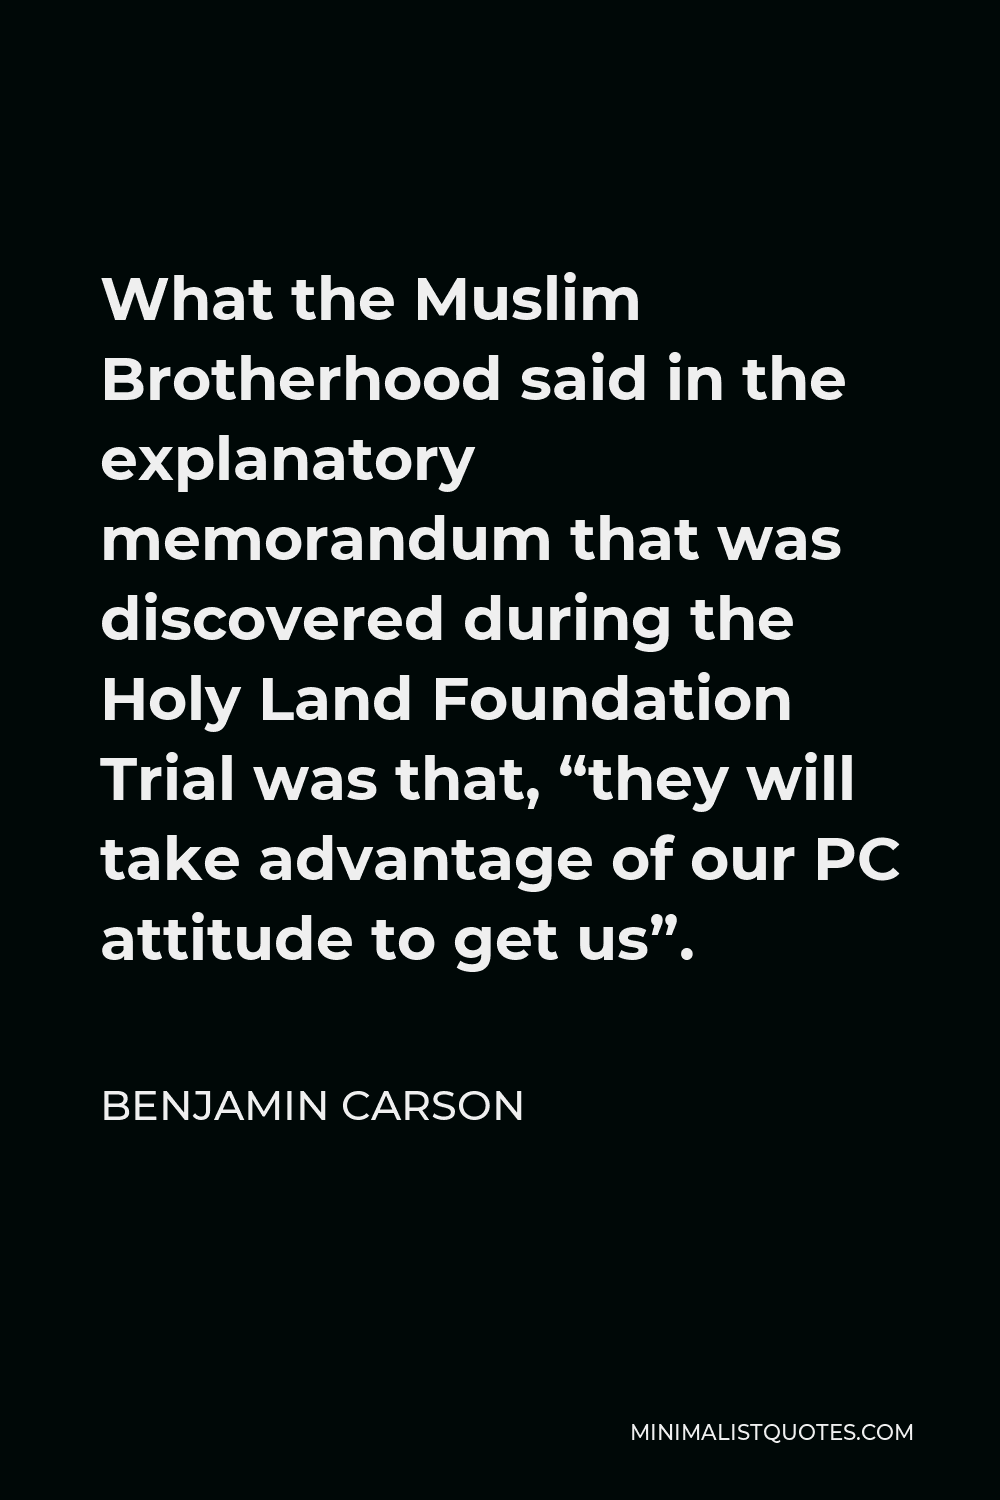 Benjamin Carson Quote - What the Muslim Brotherhood said in the explanatory memorandum that was discovered during the Holy Land Foundation Trial was that, “they will take advantage of our PC attitude to get us”.